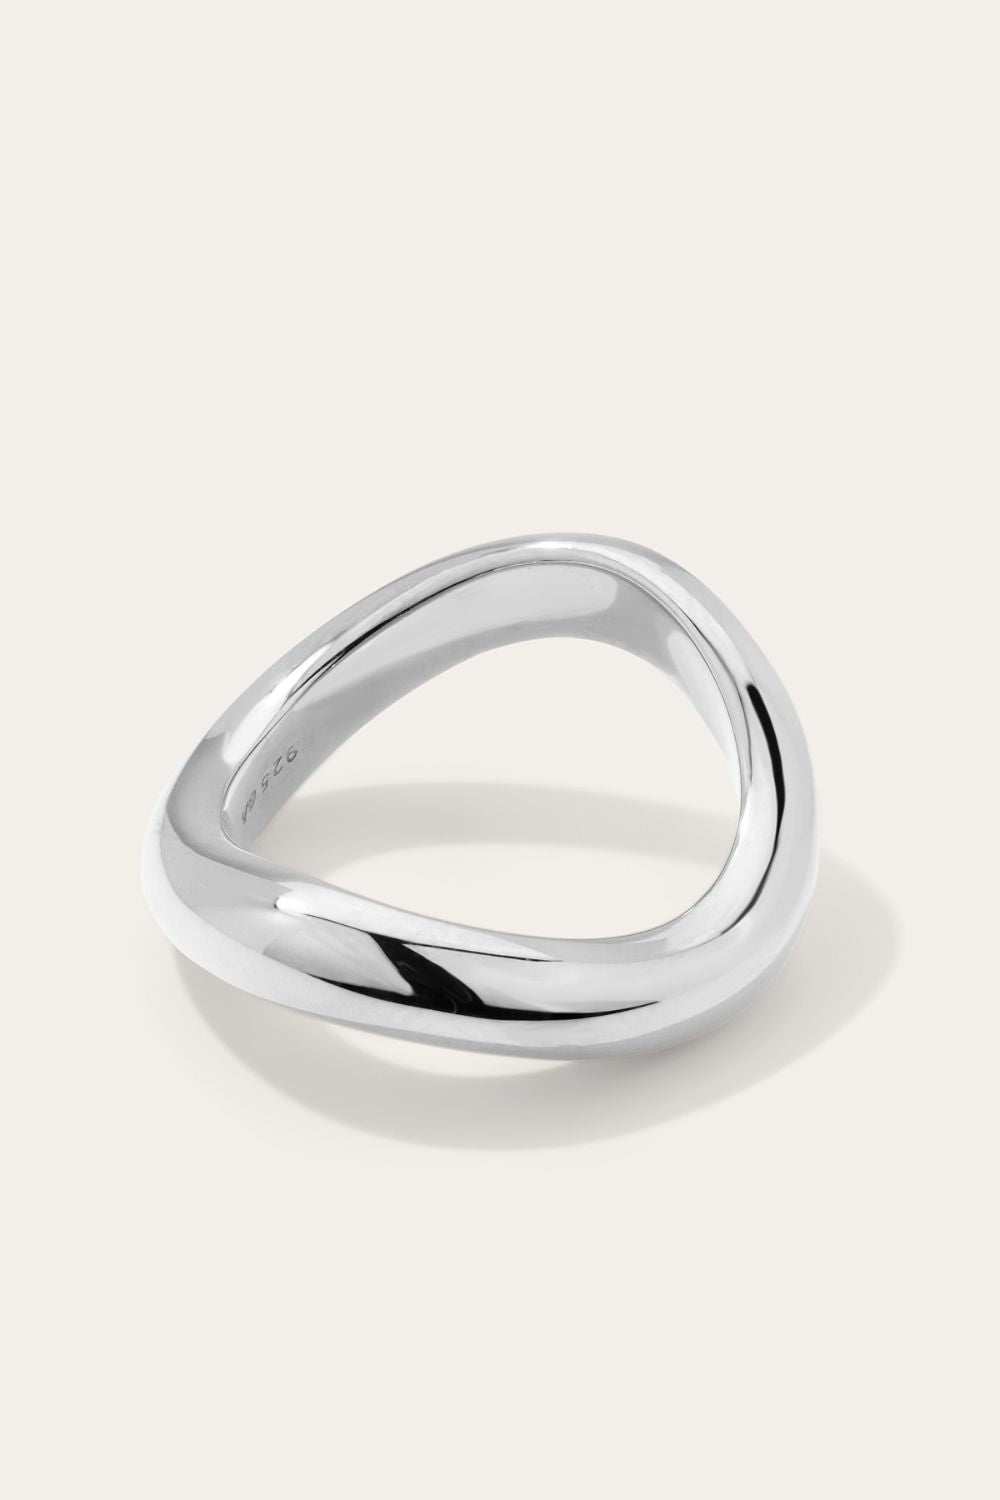 Kyma supersonic sterling silver ring